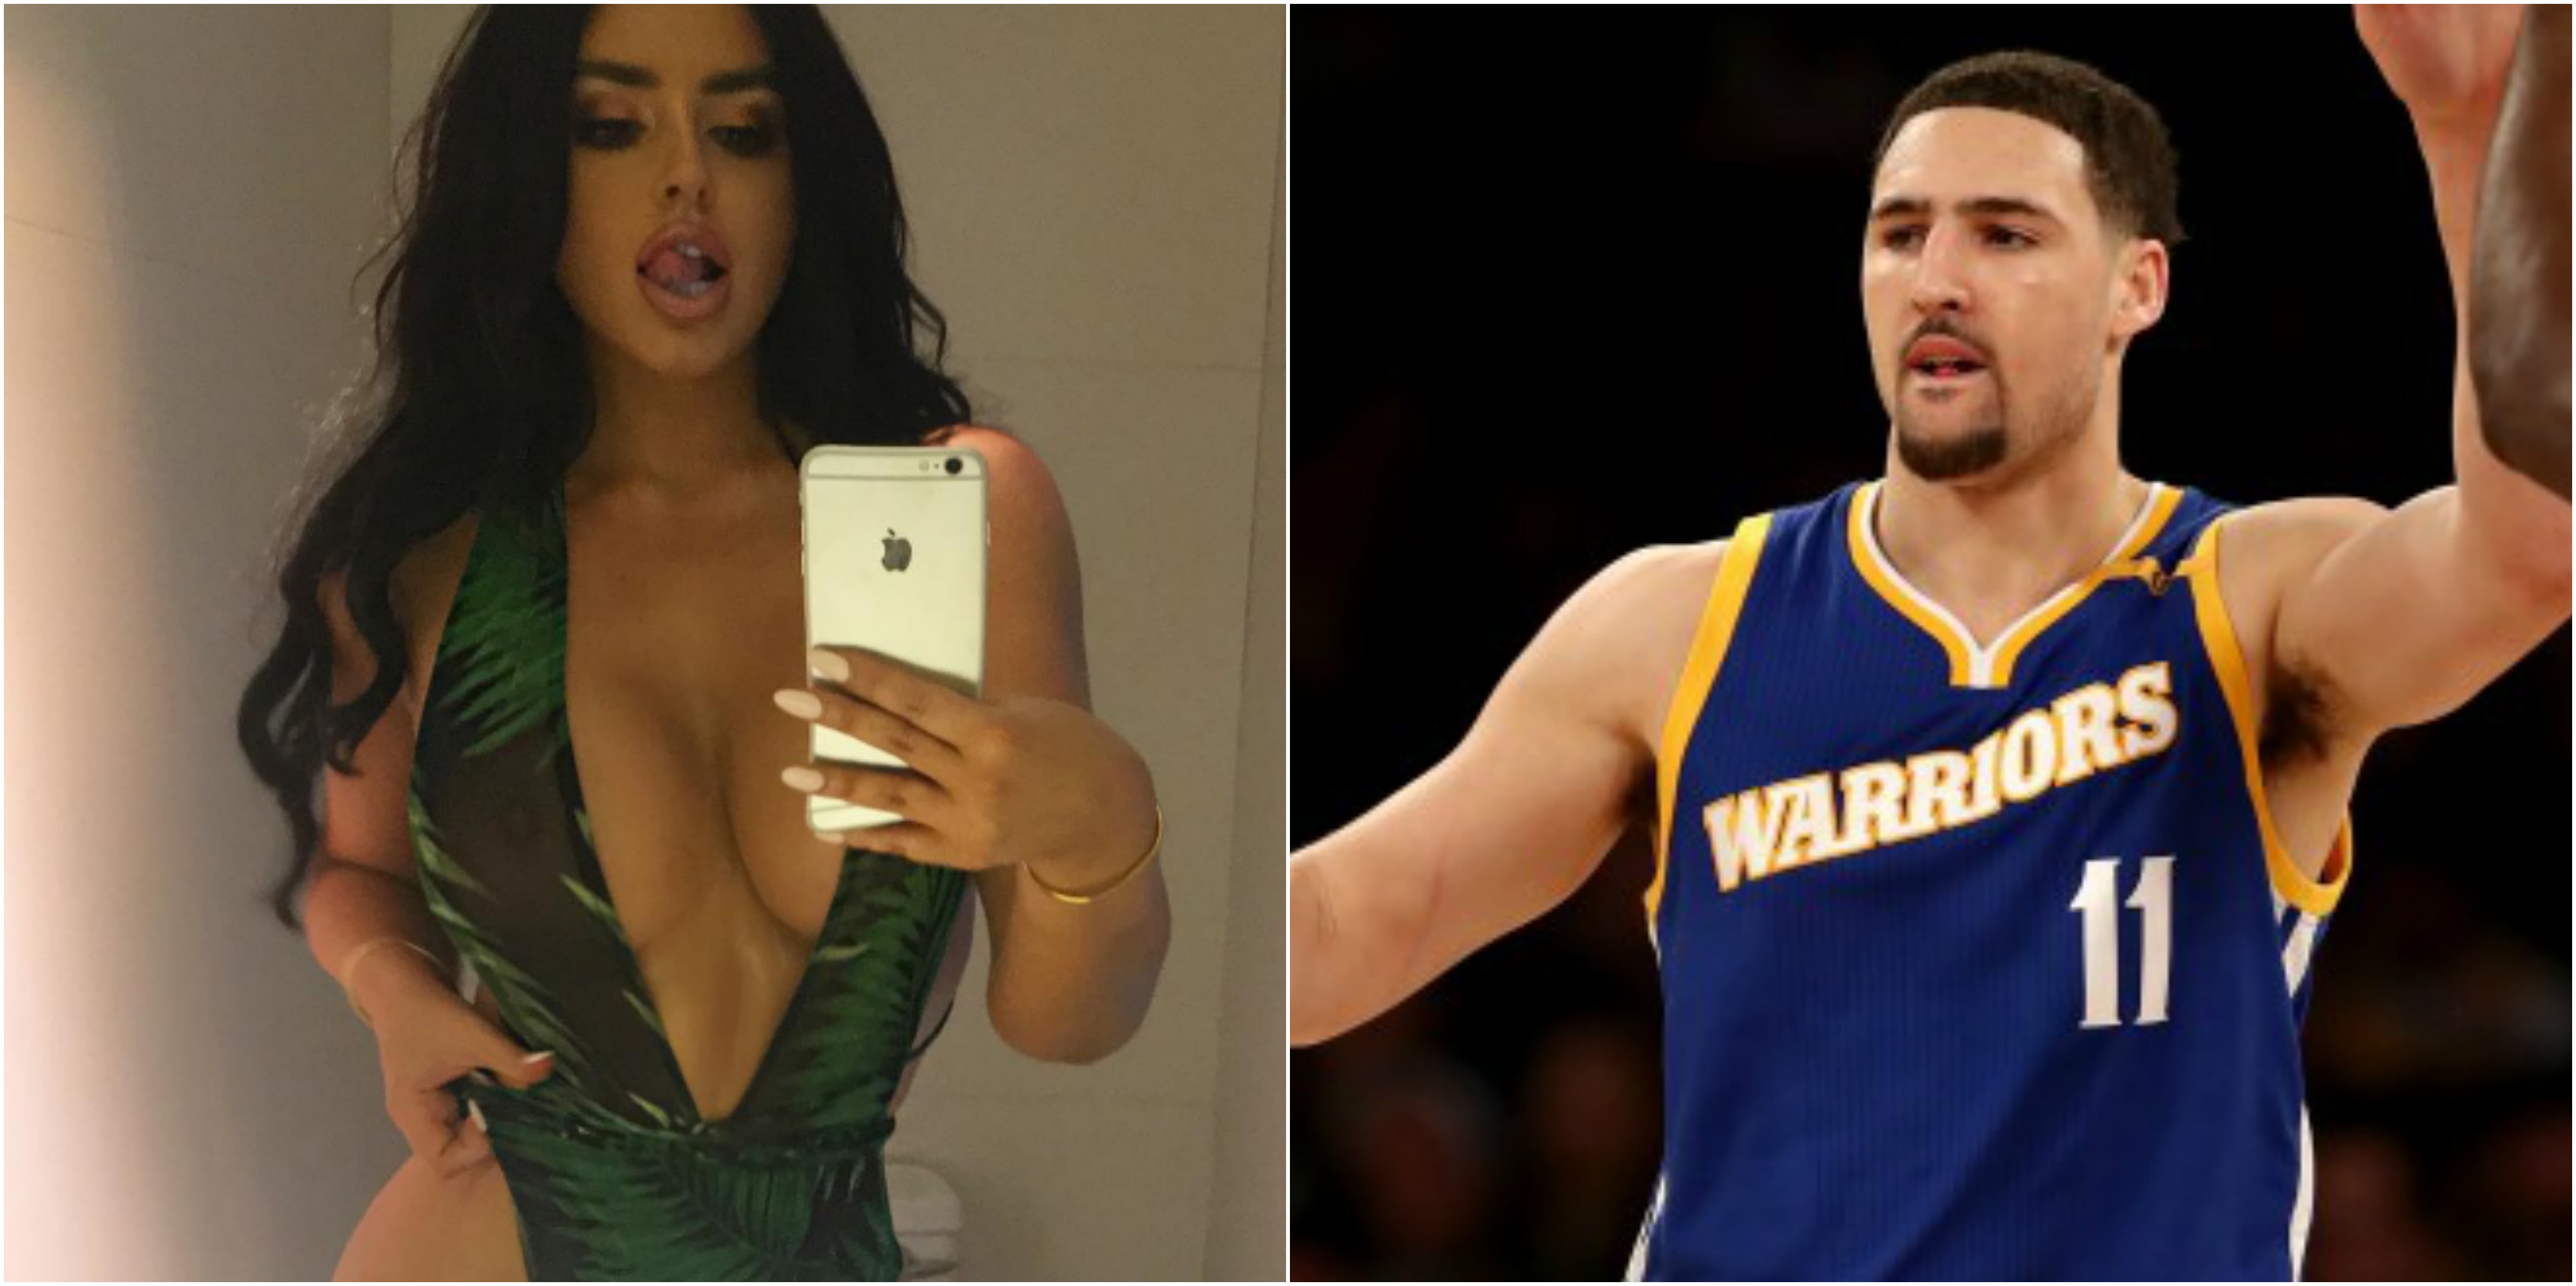 Abigail ratchford and klay